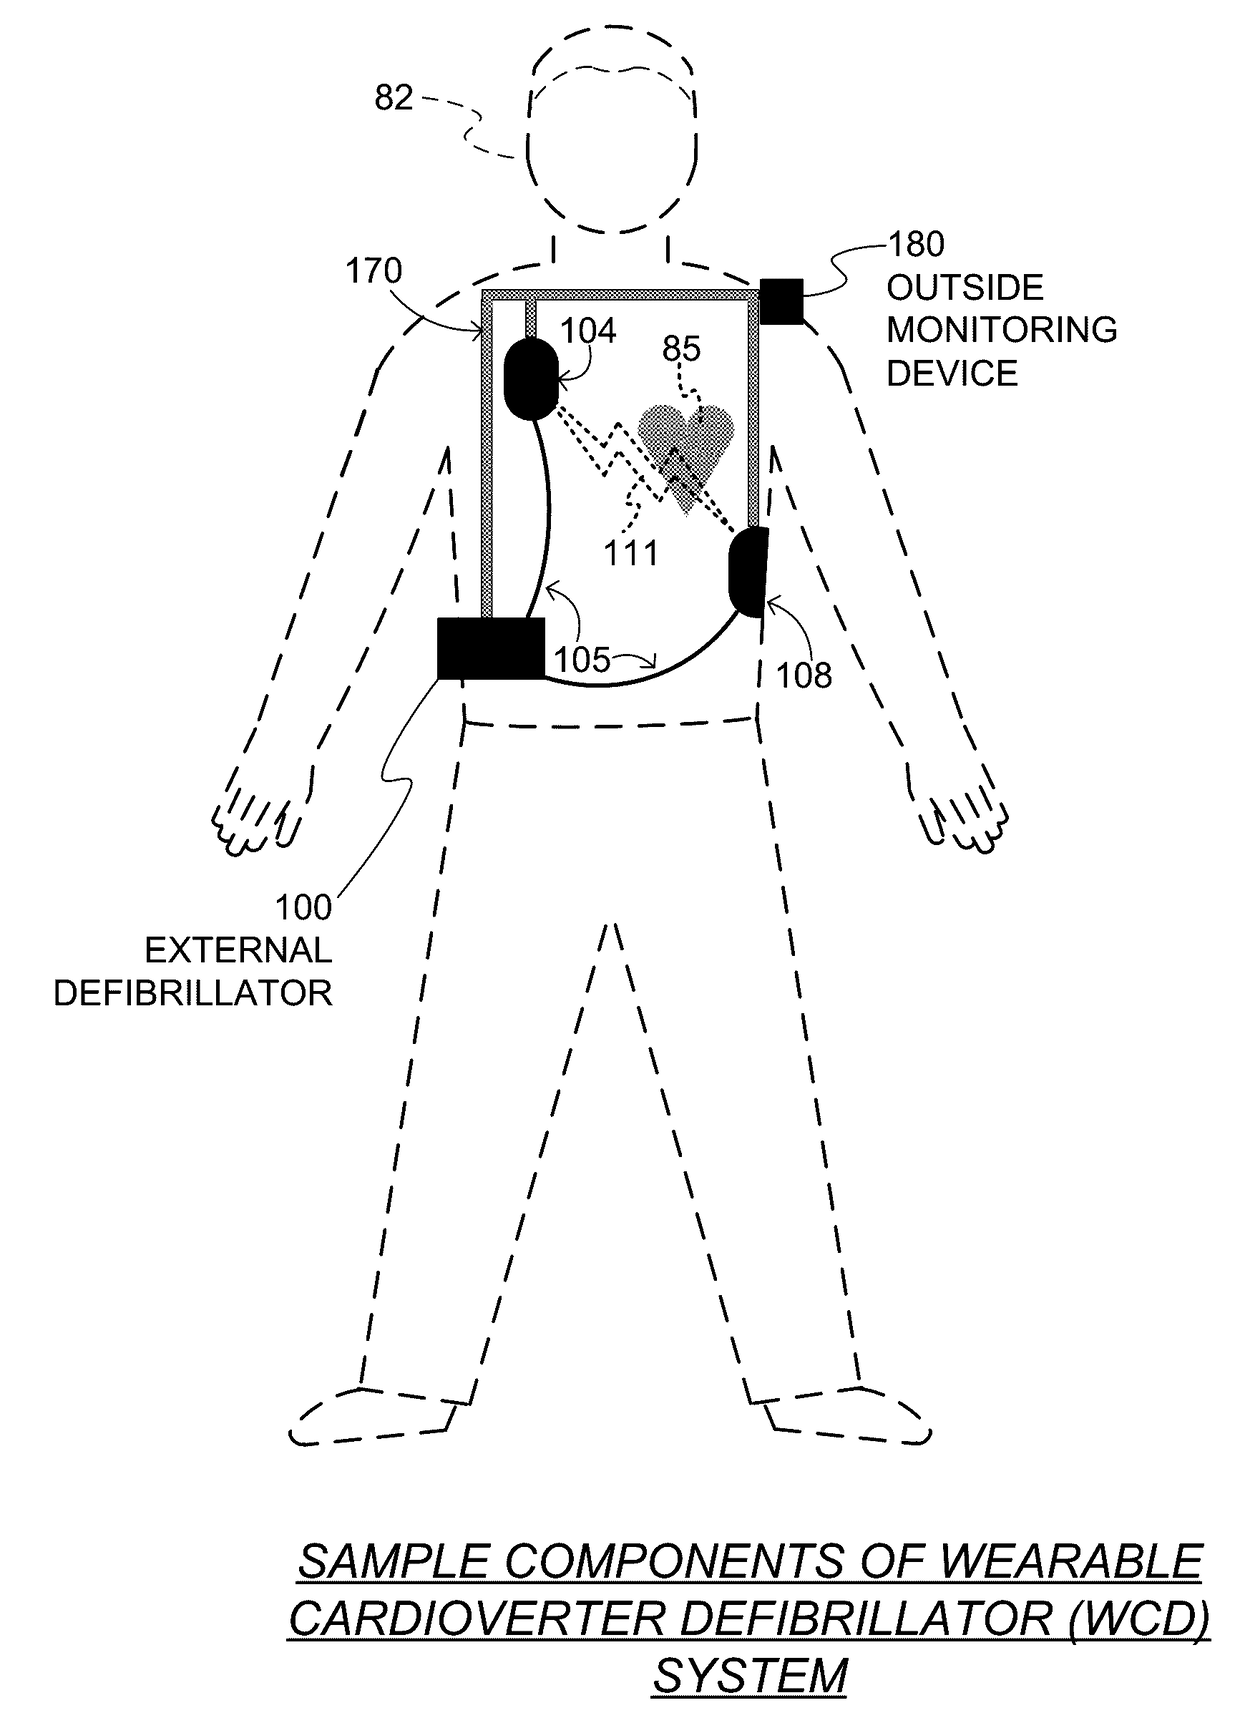 Wearable cardioverter defibrillator (WCD) causing patient's qrs width to be plotted against the heart rate